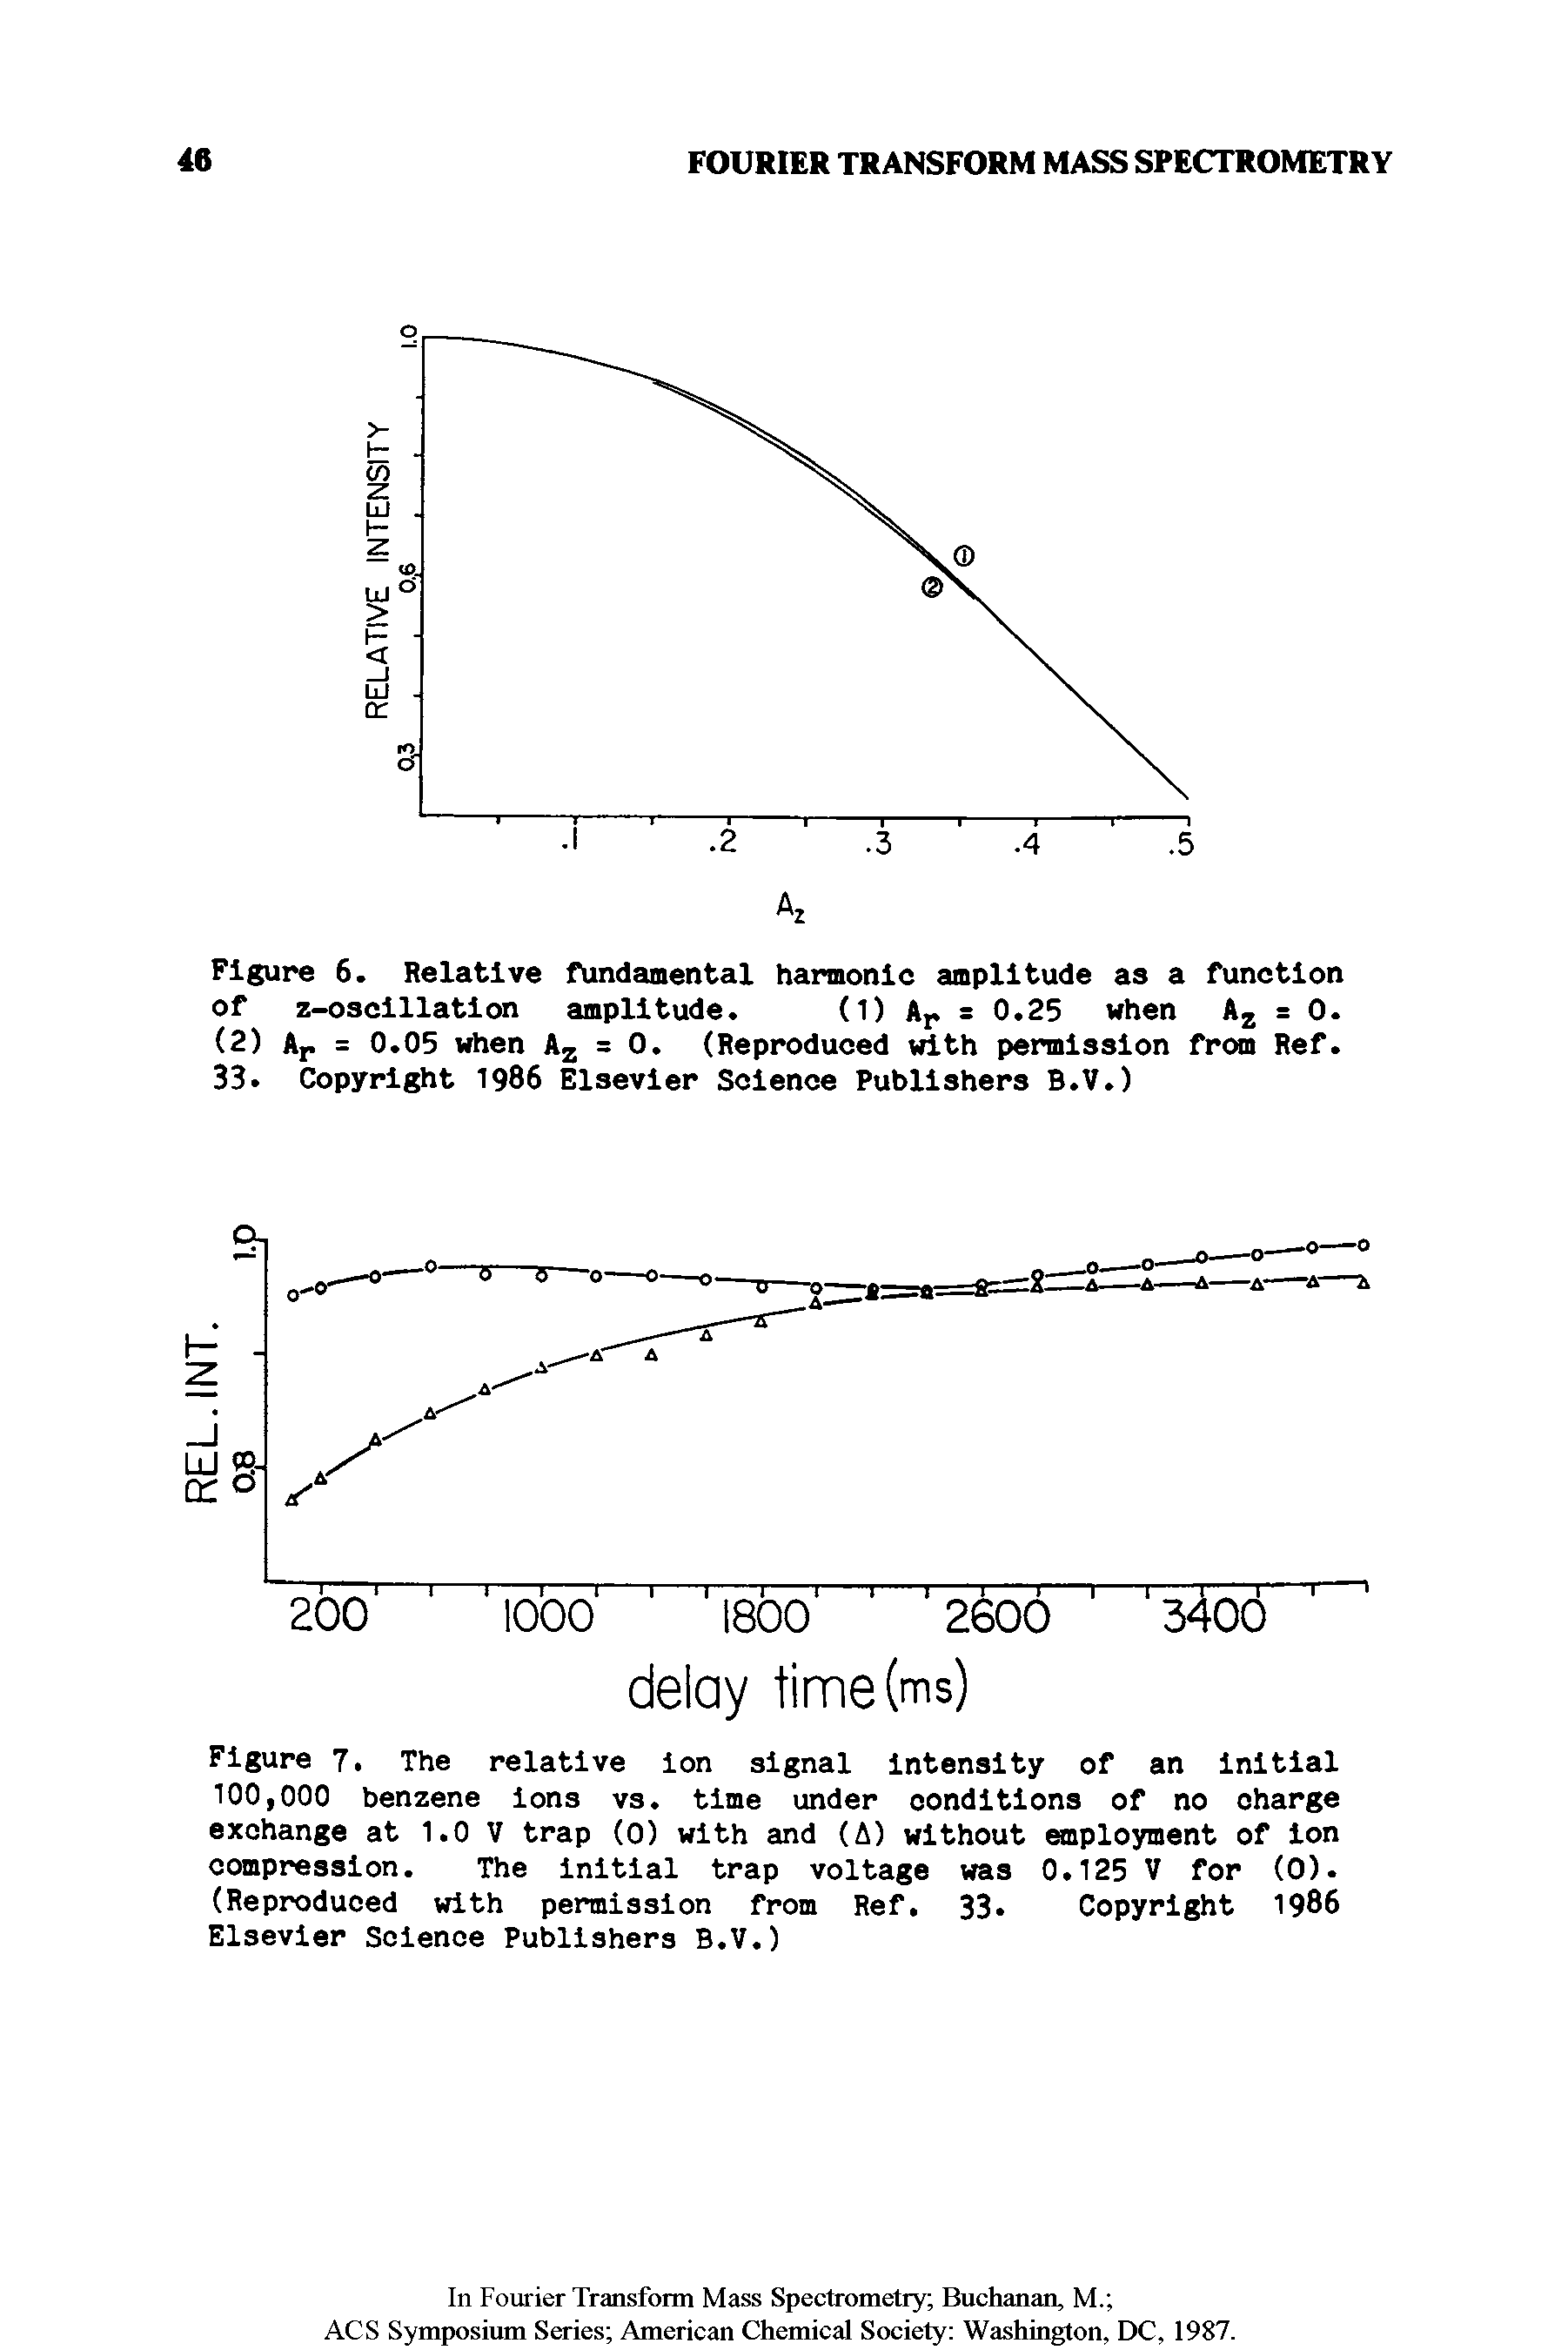 Figure 6. Relative fundamental harmonic amplitude as a function of z-oscillation amplitude. (1) Ar = 0.25 when Az = 0. (2) Ar = 0.05 when Az = 0. (Reproduced with permission from Ref. 33. Copyright 1986 Elsevier Science Publishers B.V.)...